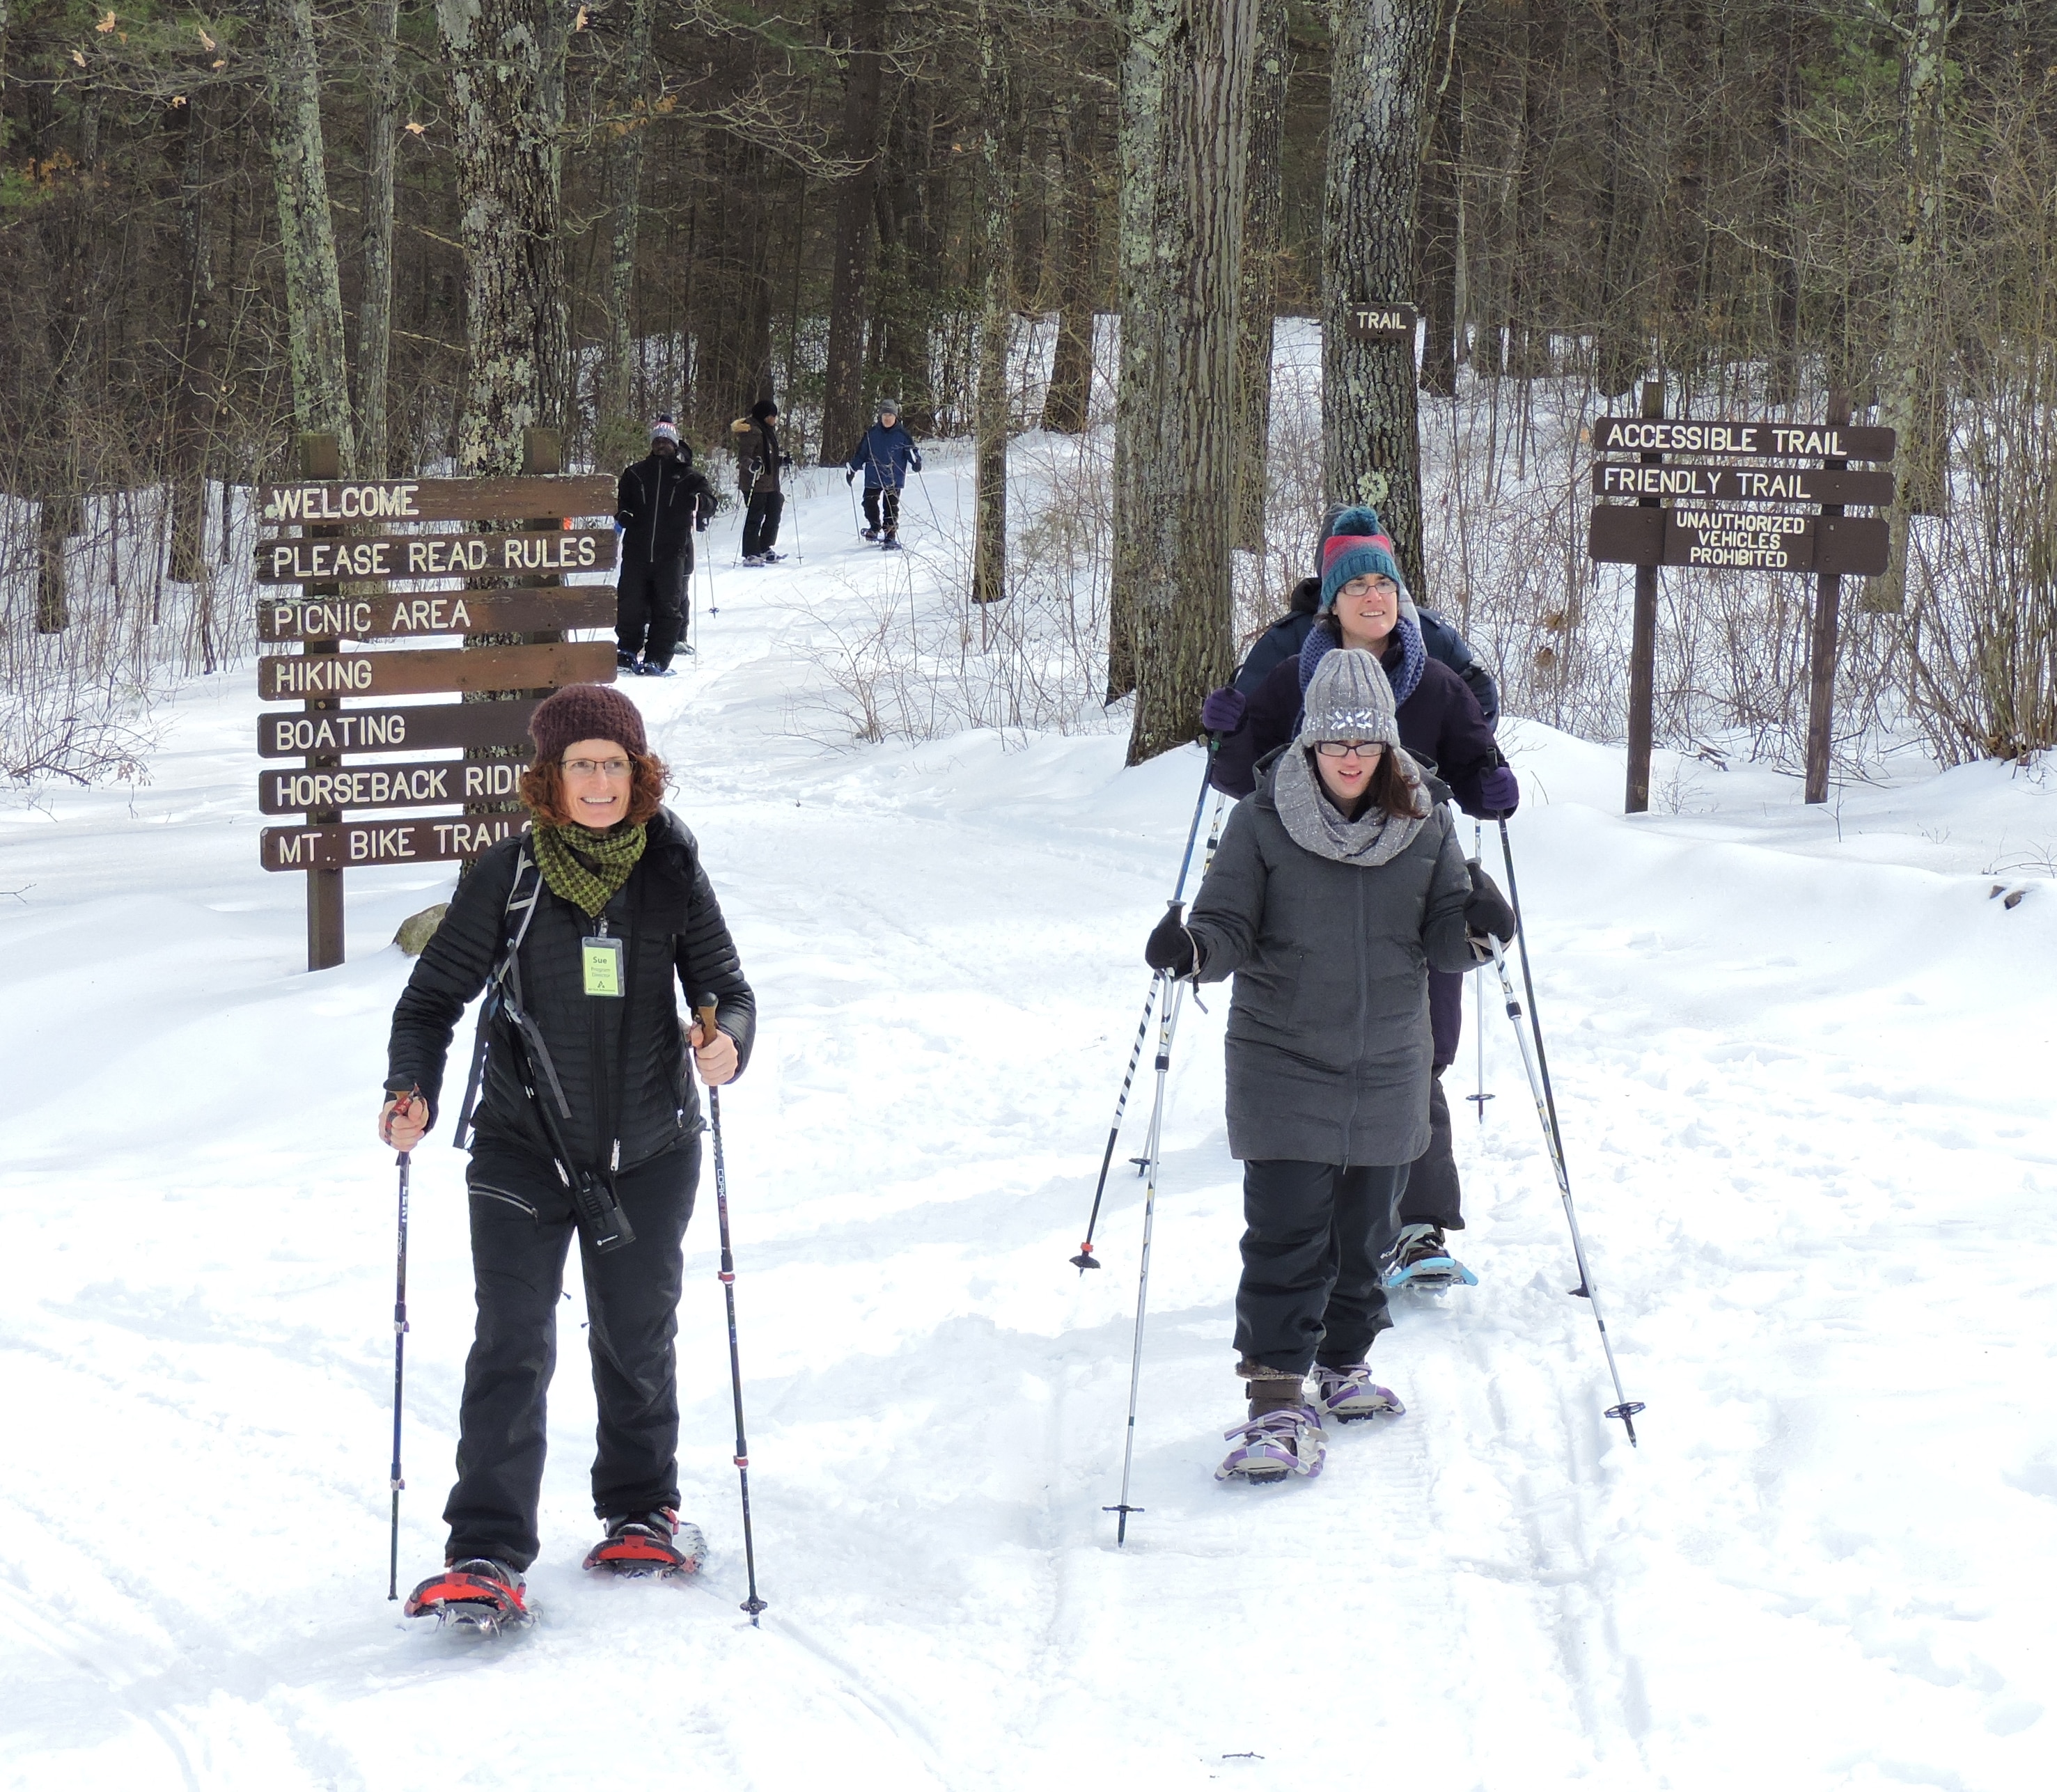 A group of snowshoers in the woods.